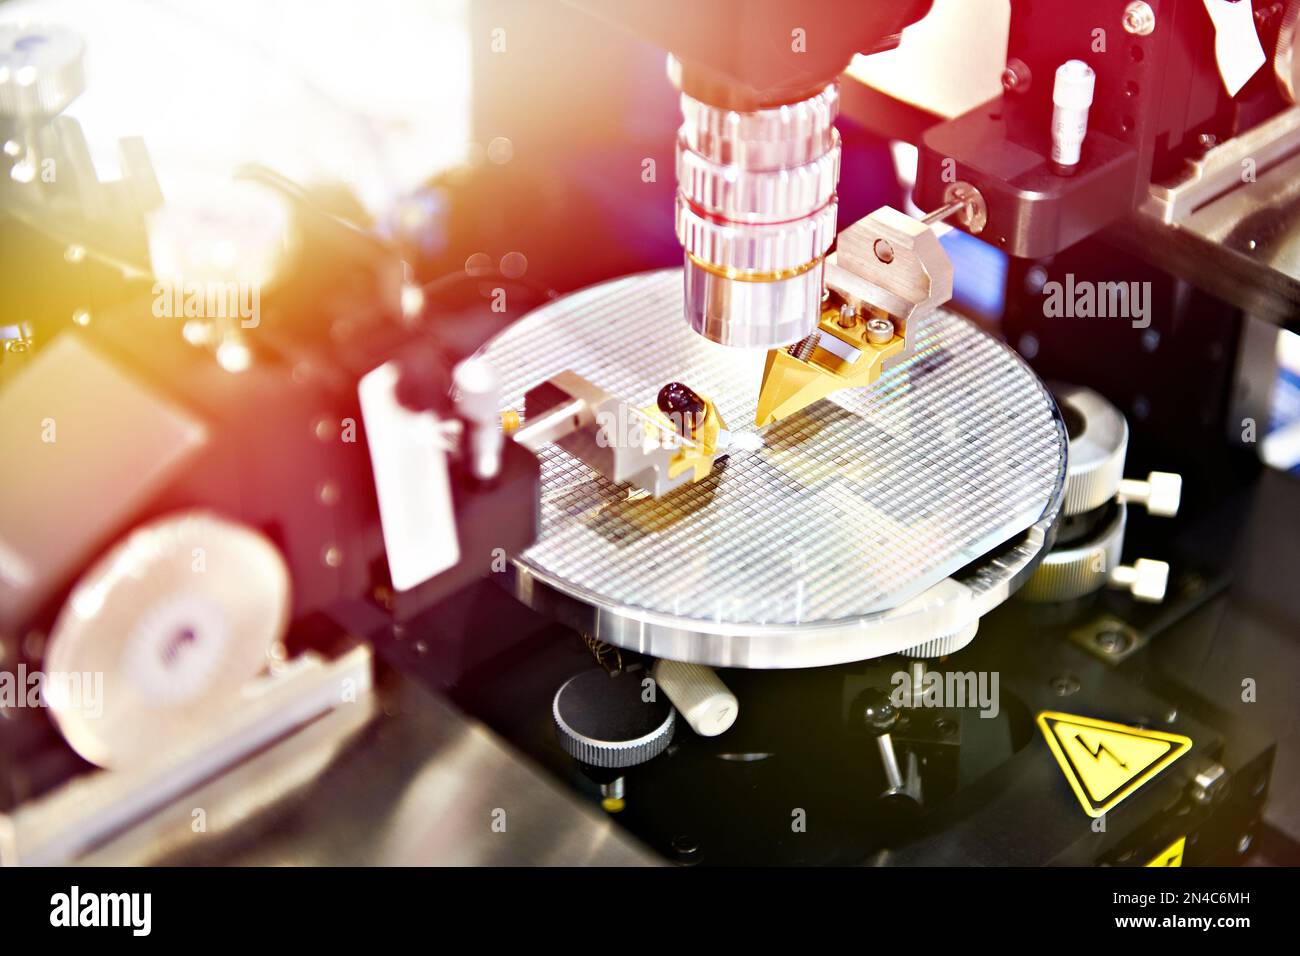 Multiport test probe system on electronic circuit Stock Photo